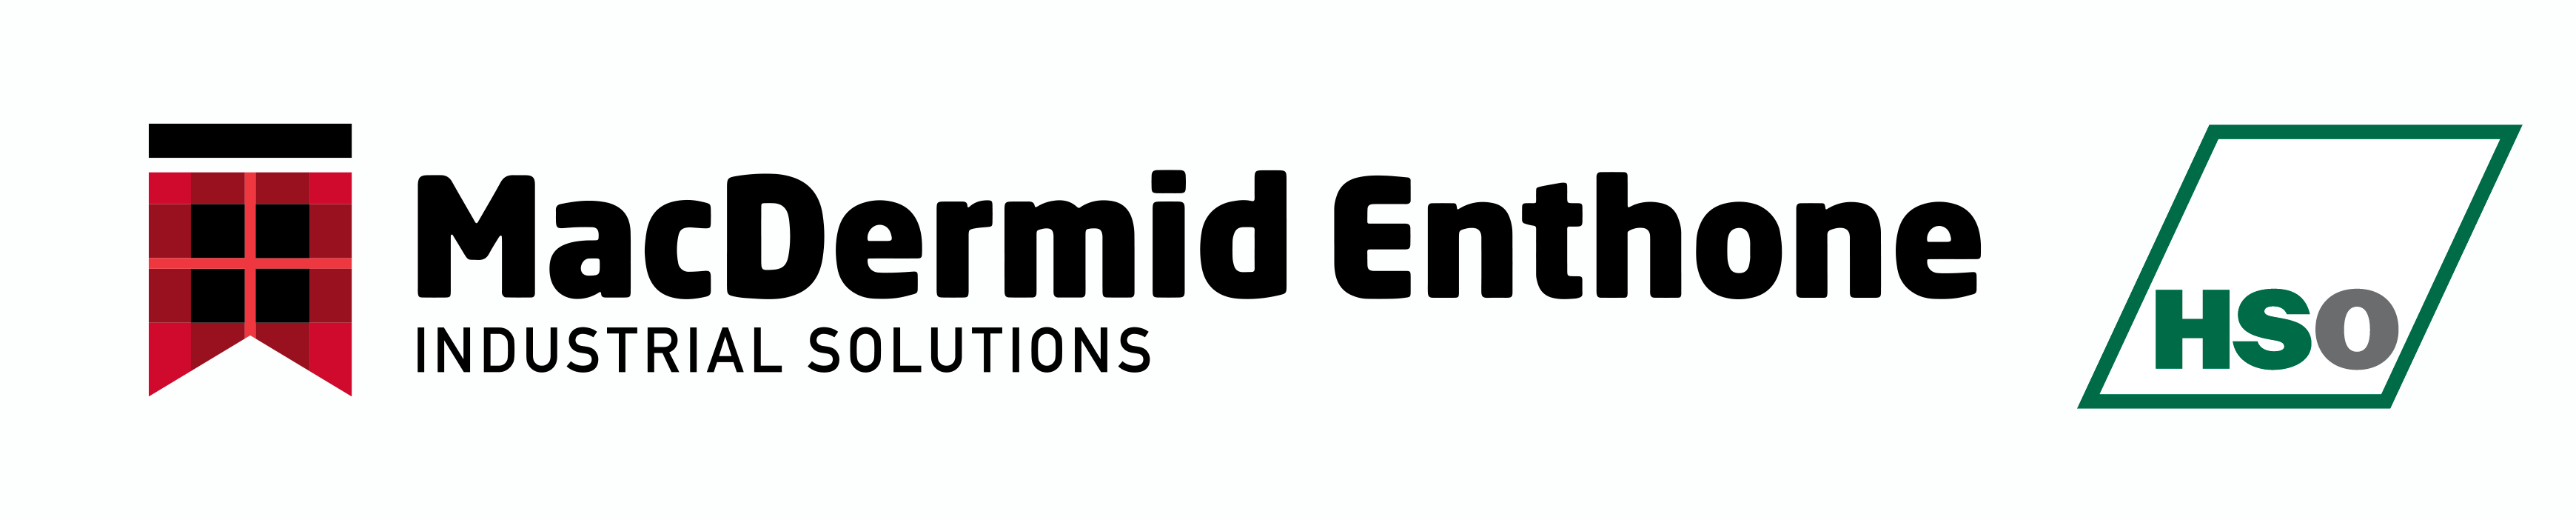 MacDermid Enthone Industrial Solutions and HSO logos